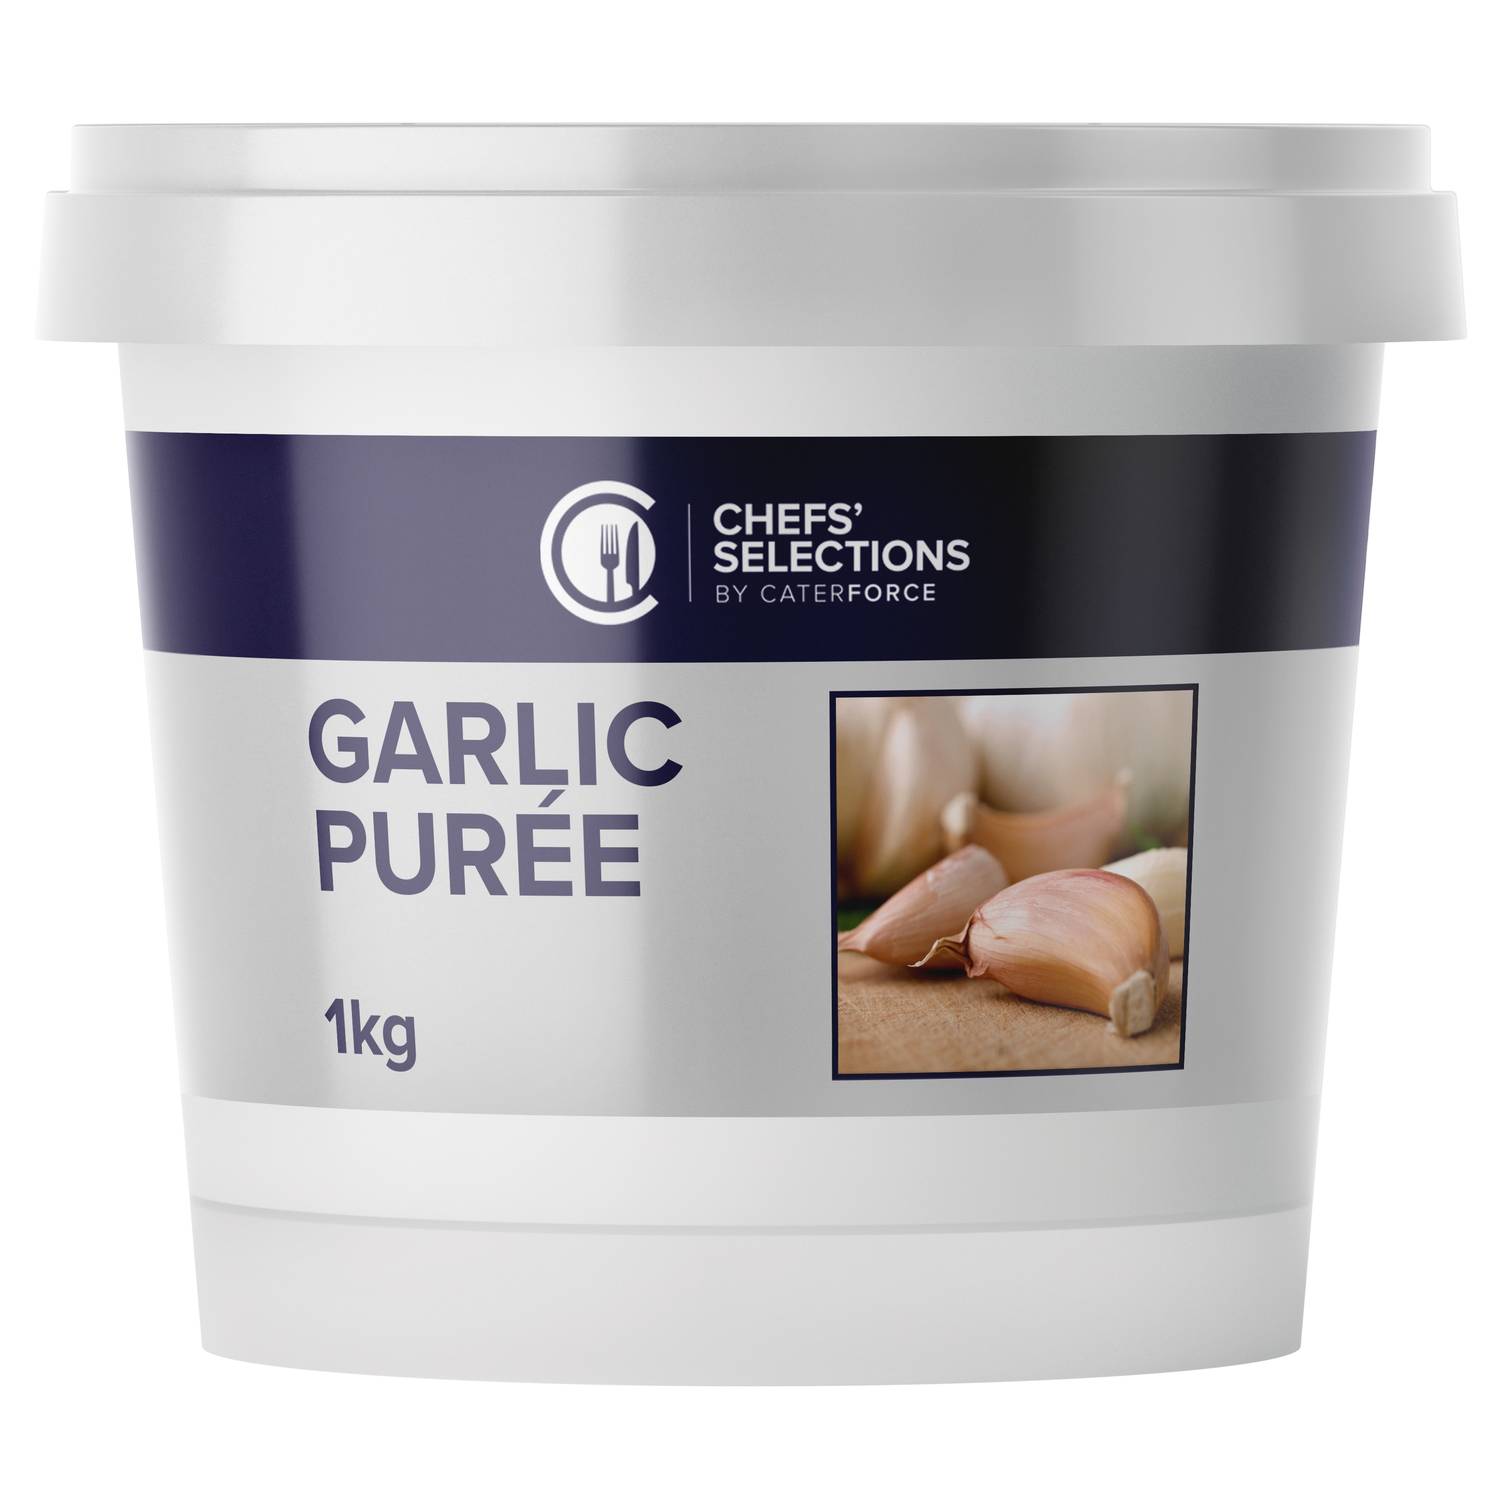 Chefs’ Selections Garlic Puree (6 x 1kg)